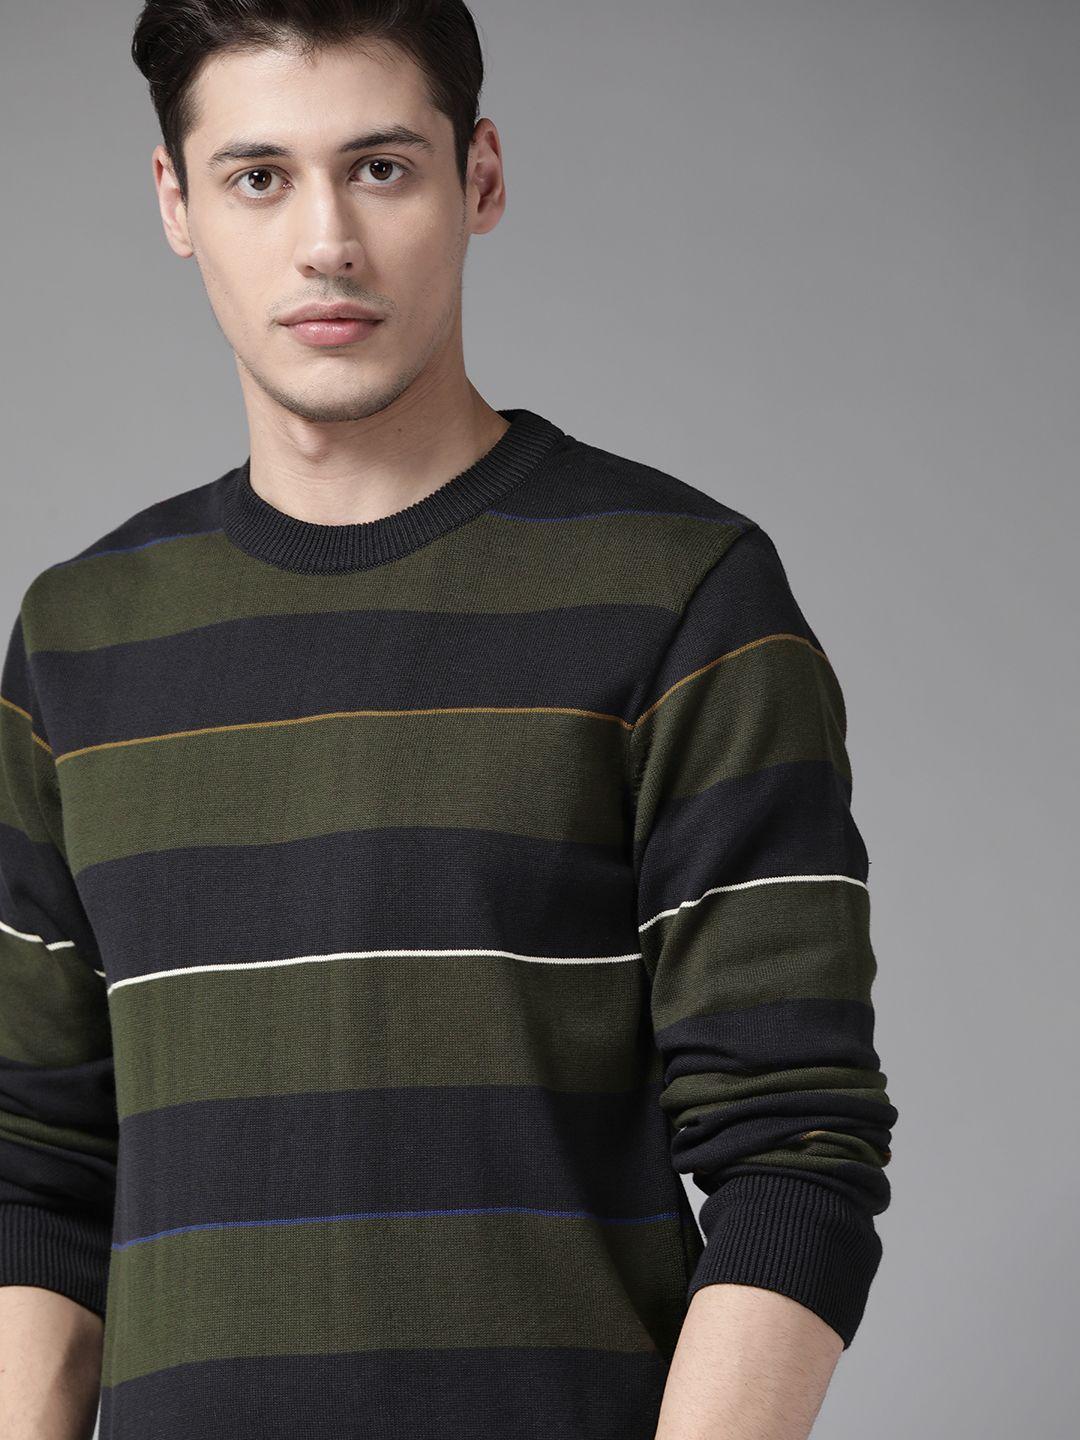 roadster-men-olive-green-&-navy-blue-striped-pure-cotton-pullover